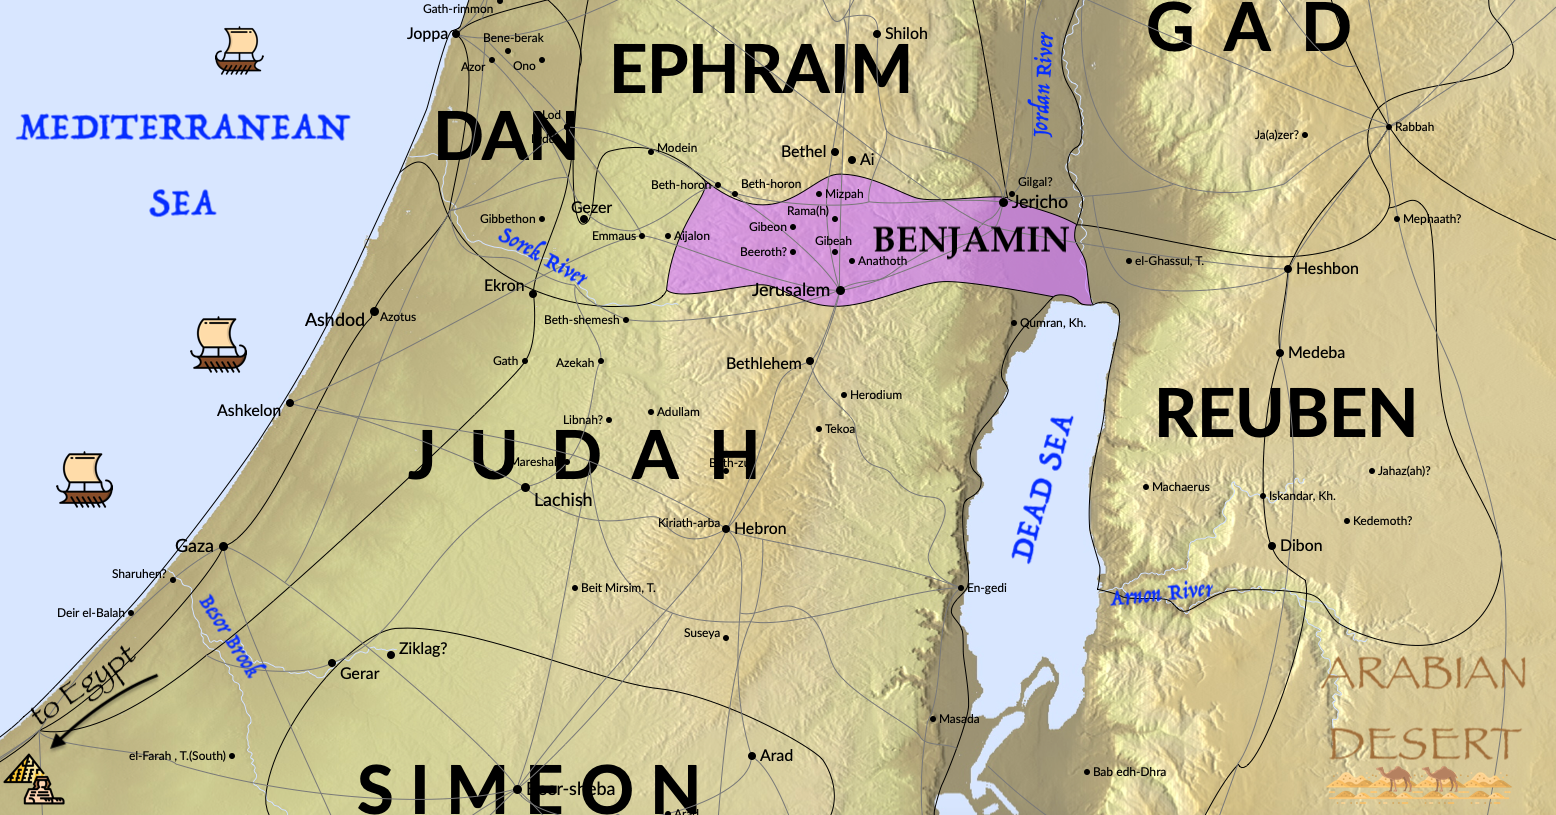 The tribe of Benjamin occupied a central inheritance. Thus, despite its diminutive size the tribe exercised a great deal of influence on the history of Israel.